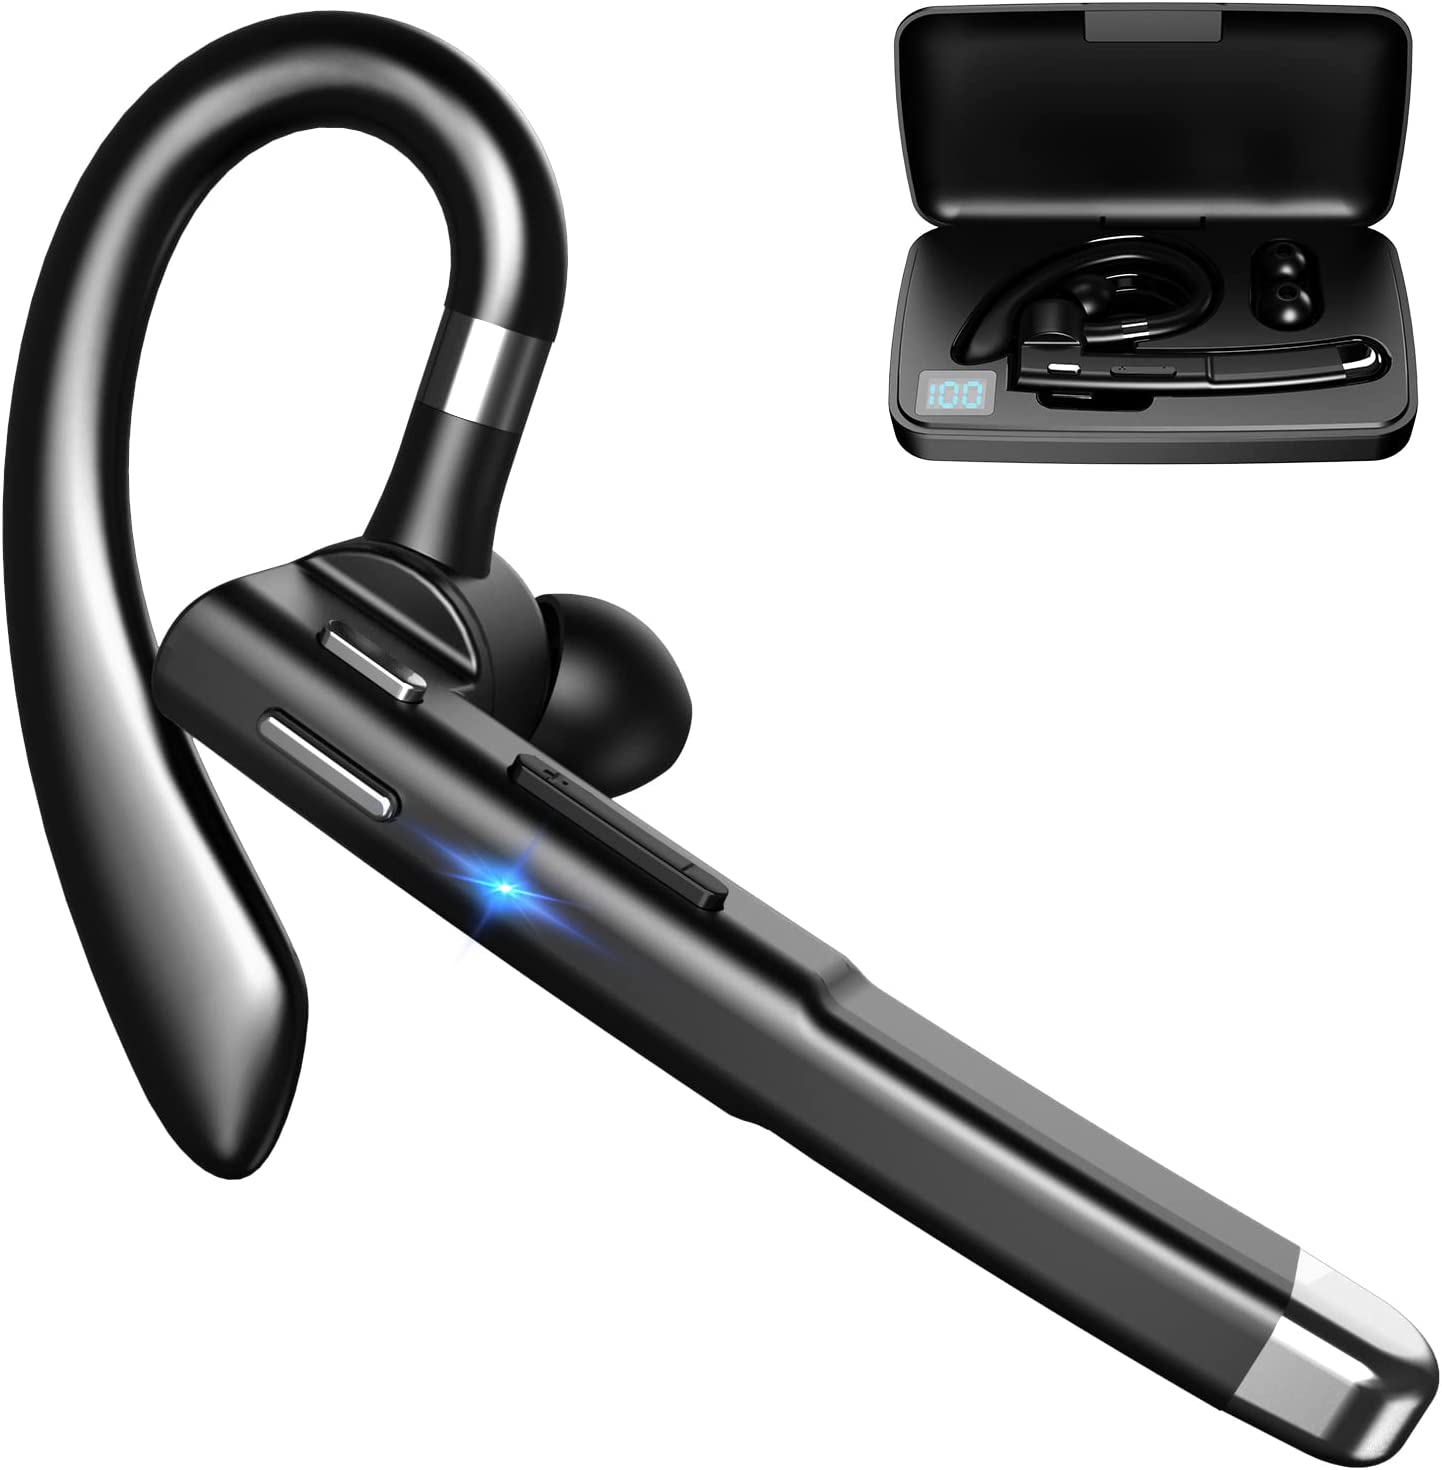 Bluetooth Headset One Ear Earphone Earpiece for Cell Phones – Just $29.99 at Amazon